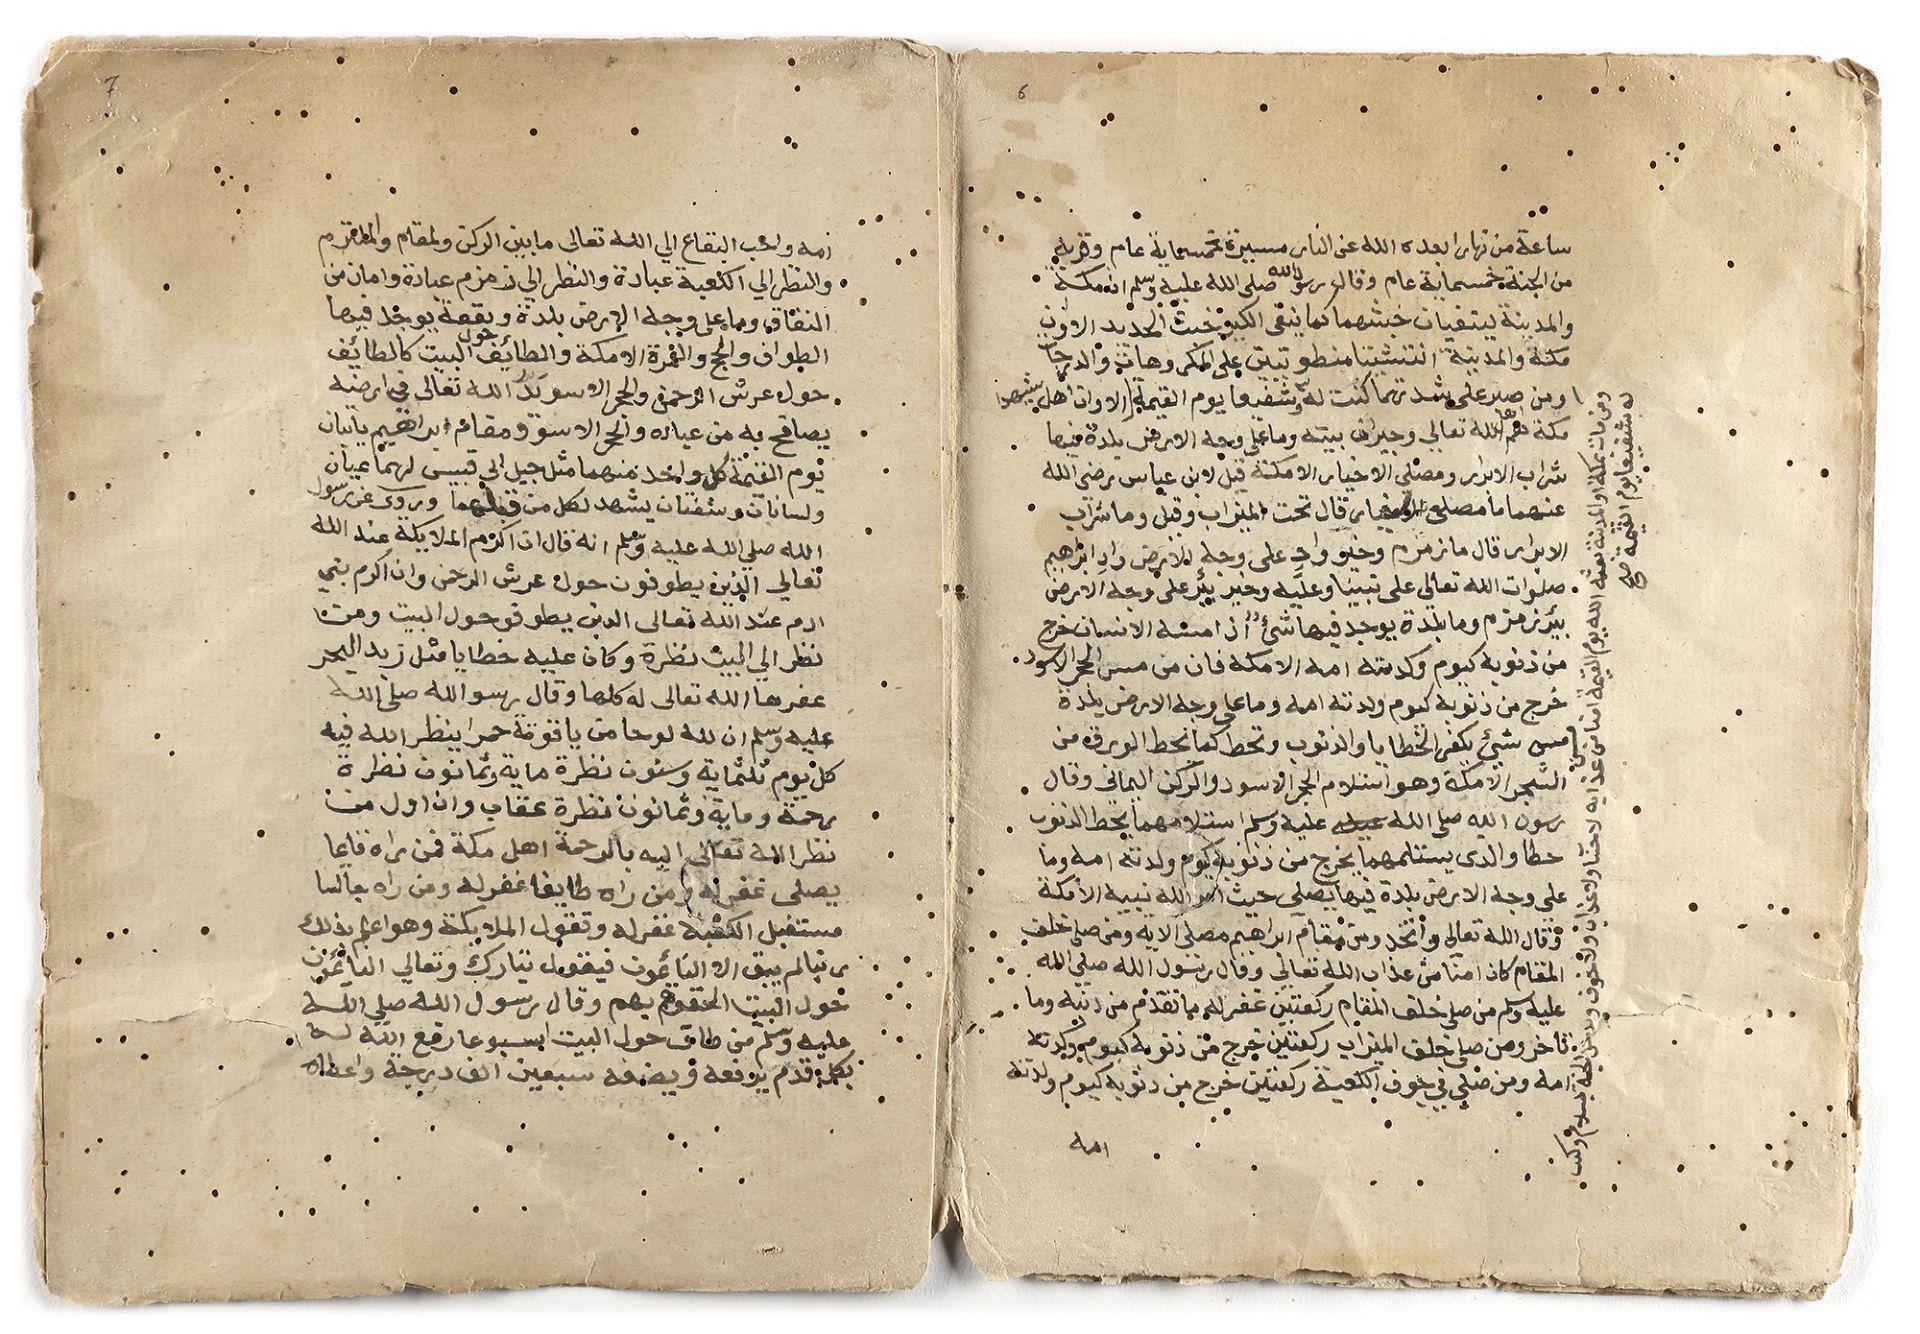 A CHAPTER ABOUT THE MERITS OF MECCA BY IBRAHIM IBN AHMED AL-SHAFI'I, IN MECCA AND DATED 1267 AH/1850 - Image 3 of 4